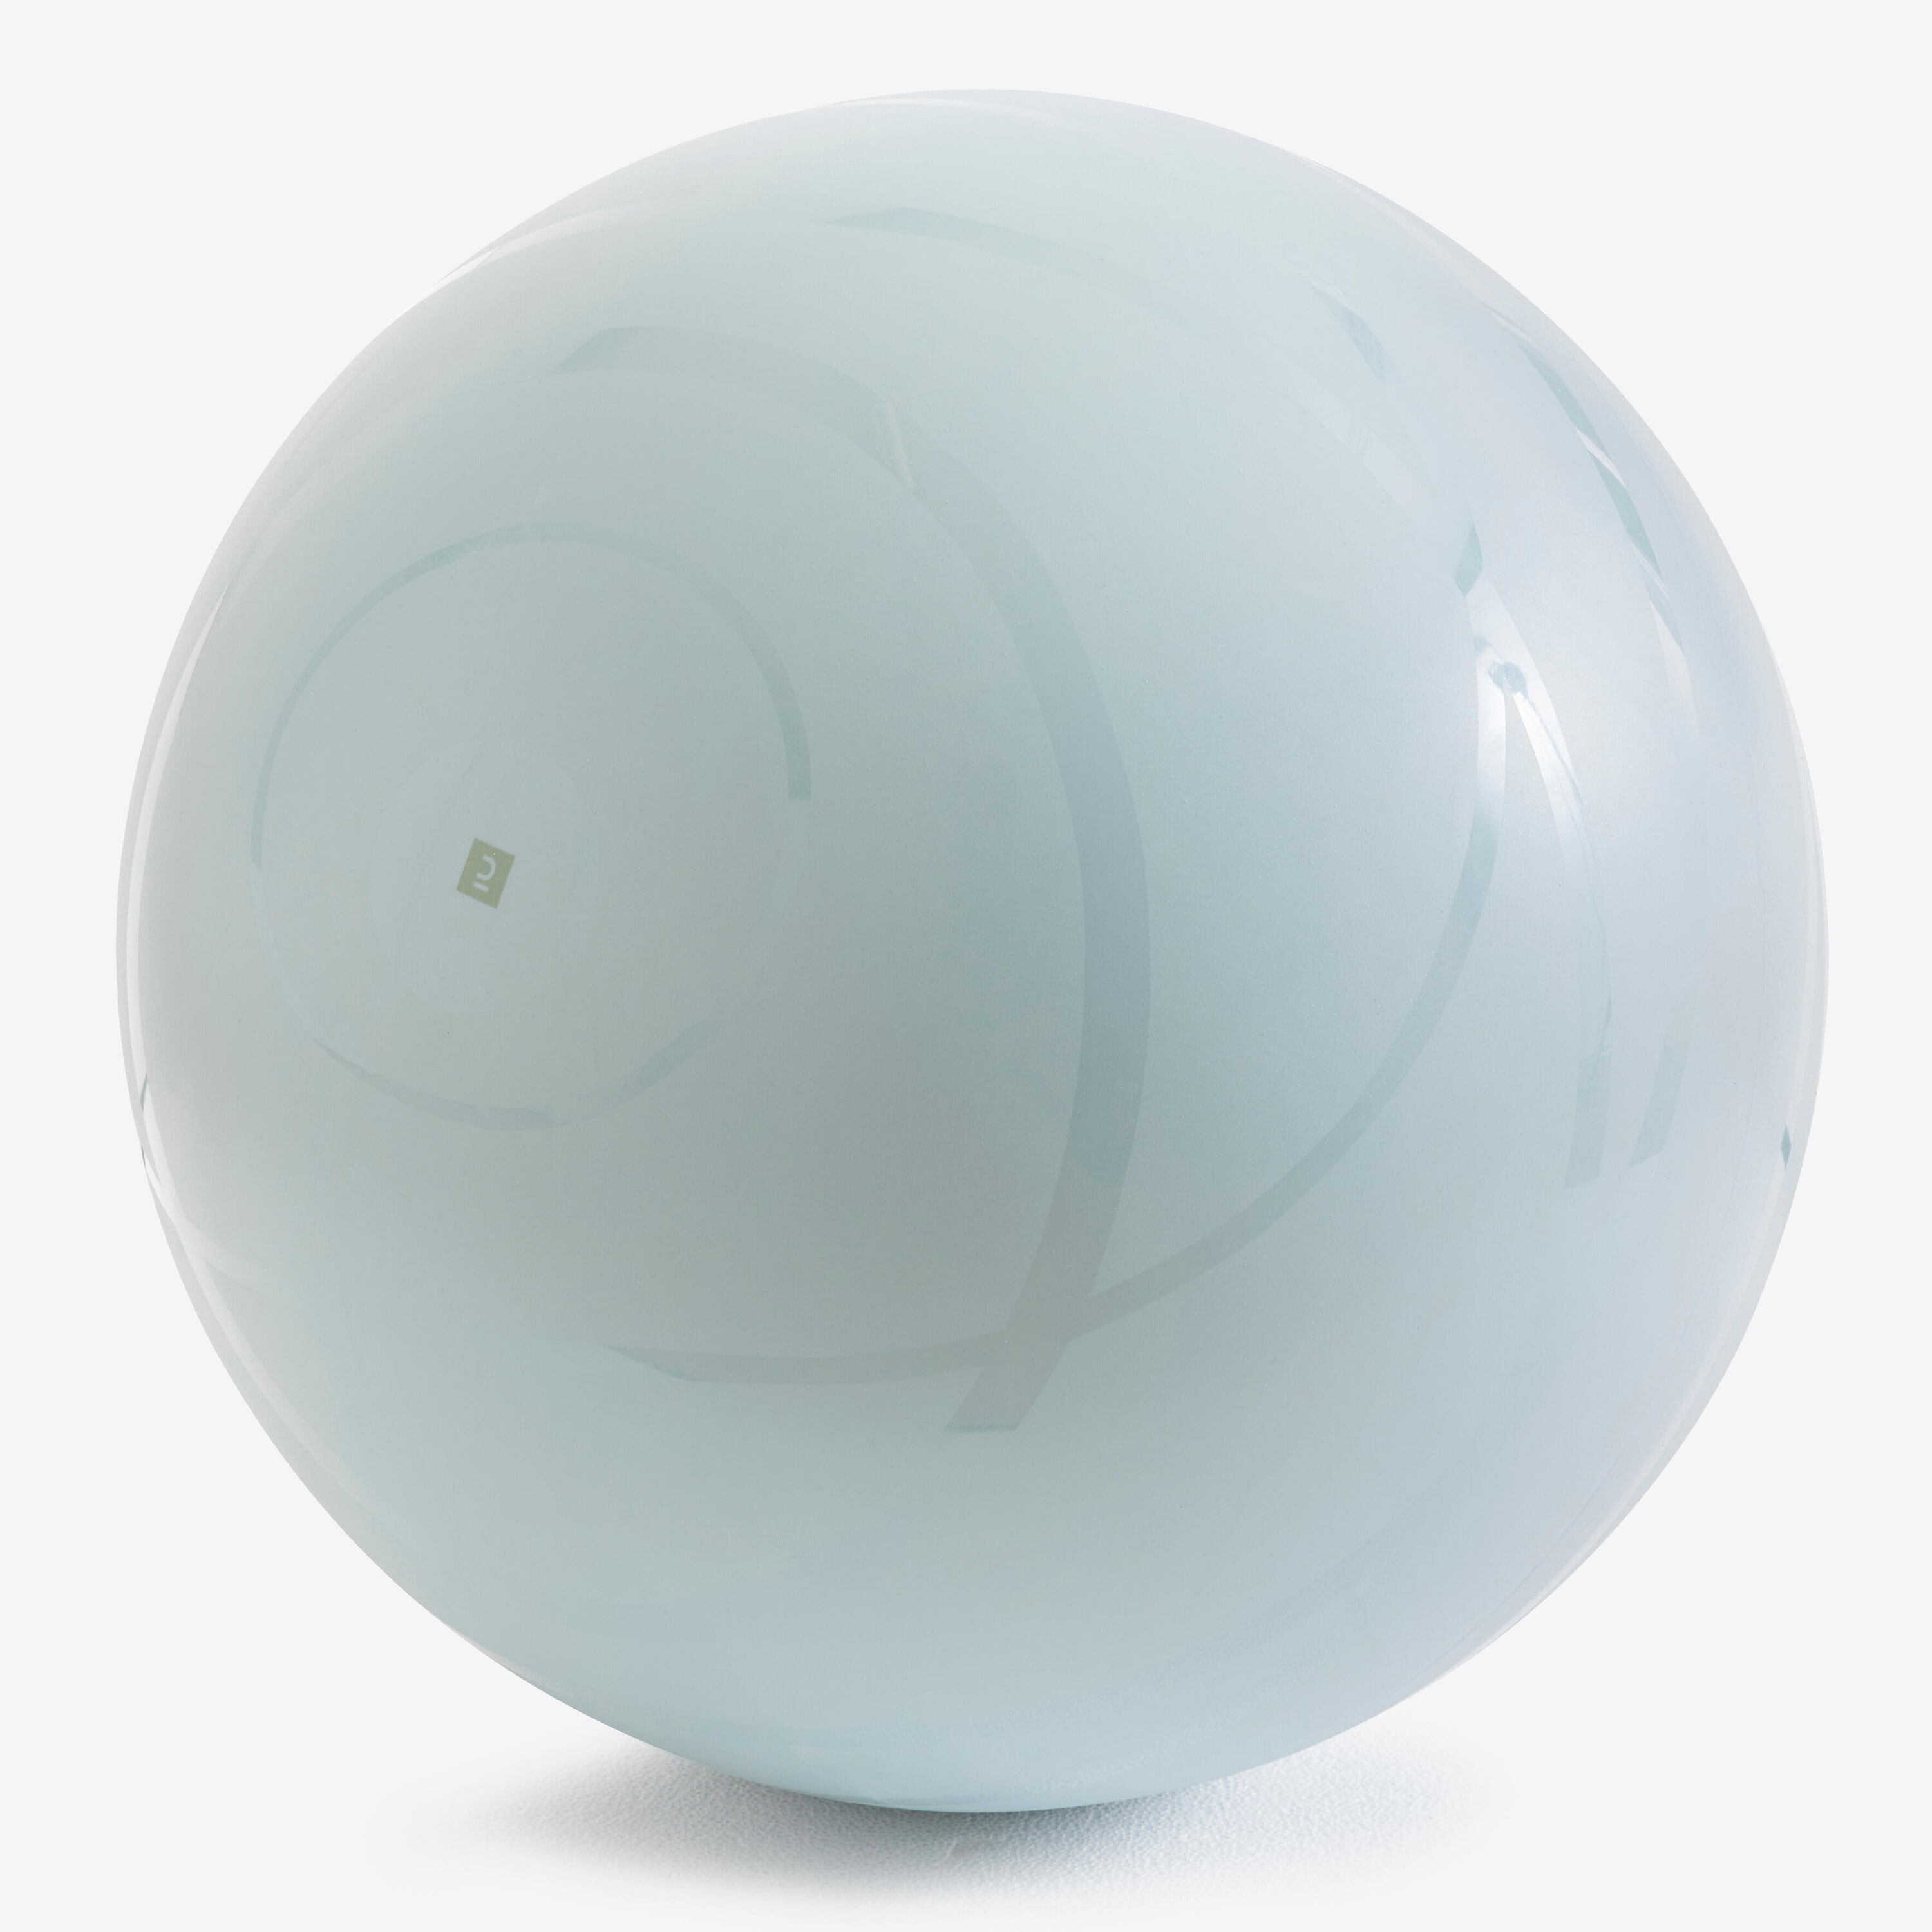 DOMYOS Gym Ball with Pump Included for Quick Inflation/Deflation Size 3/75 cm